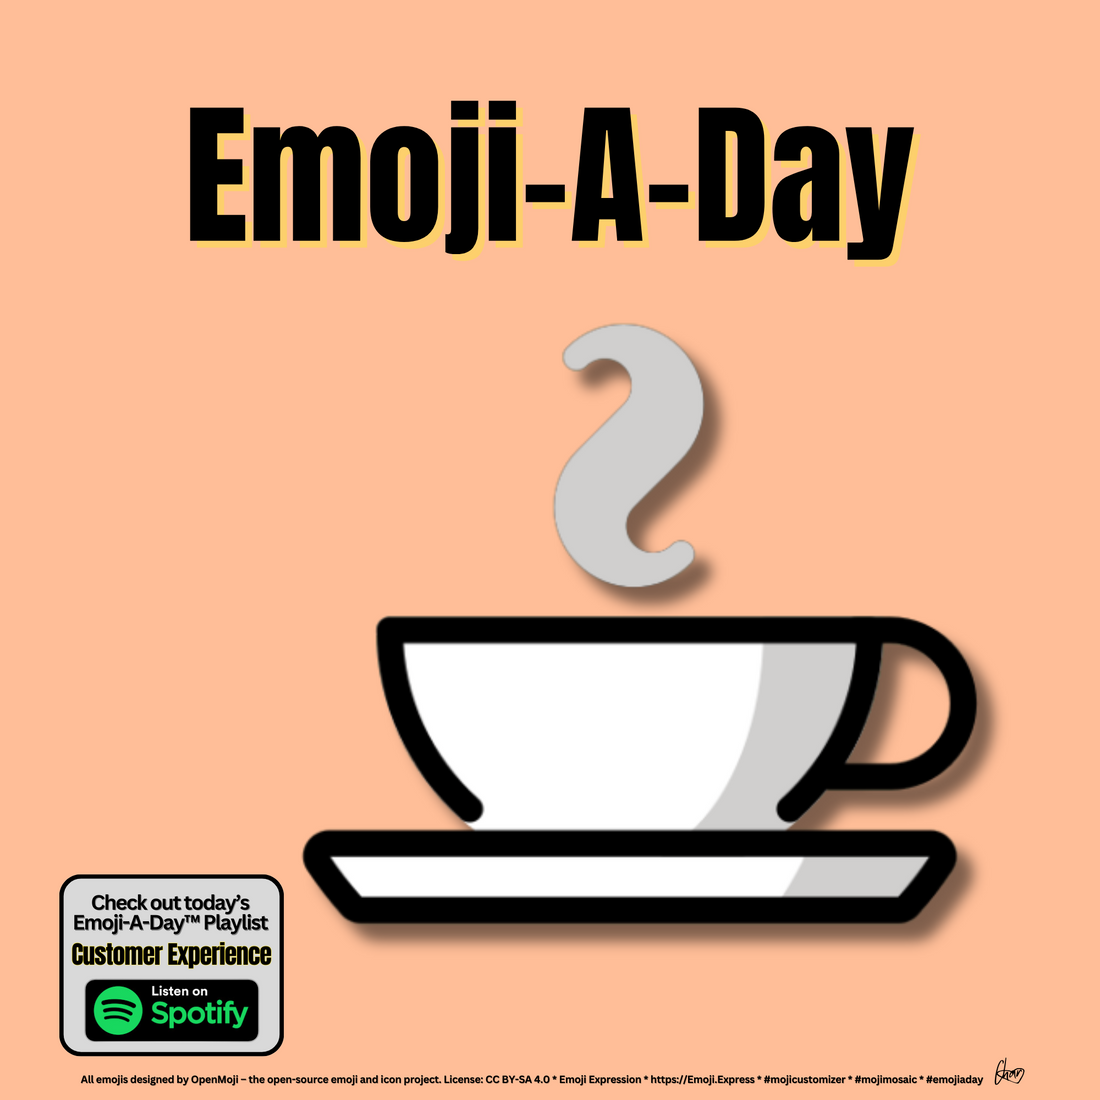 Emoij-A-Day theme with Hot Beverage emoji and Customer Experience Spotify Playlist